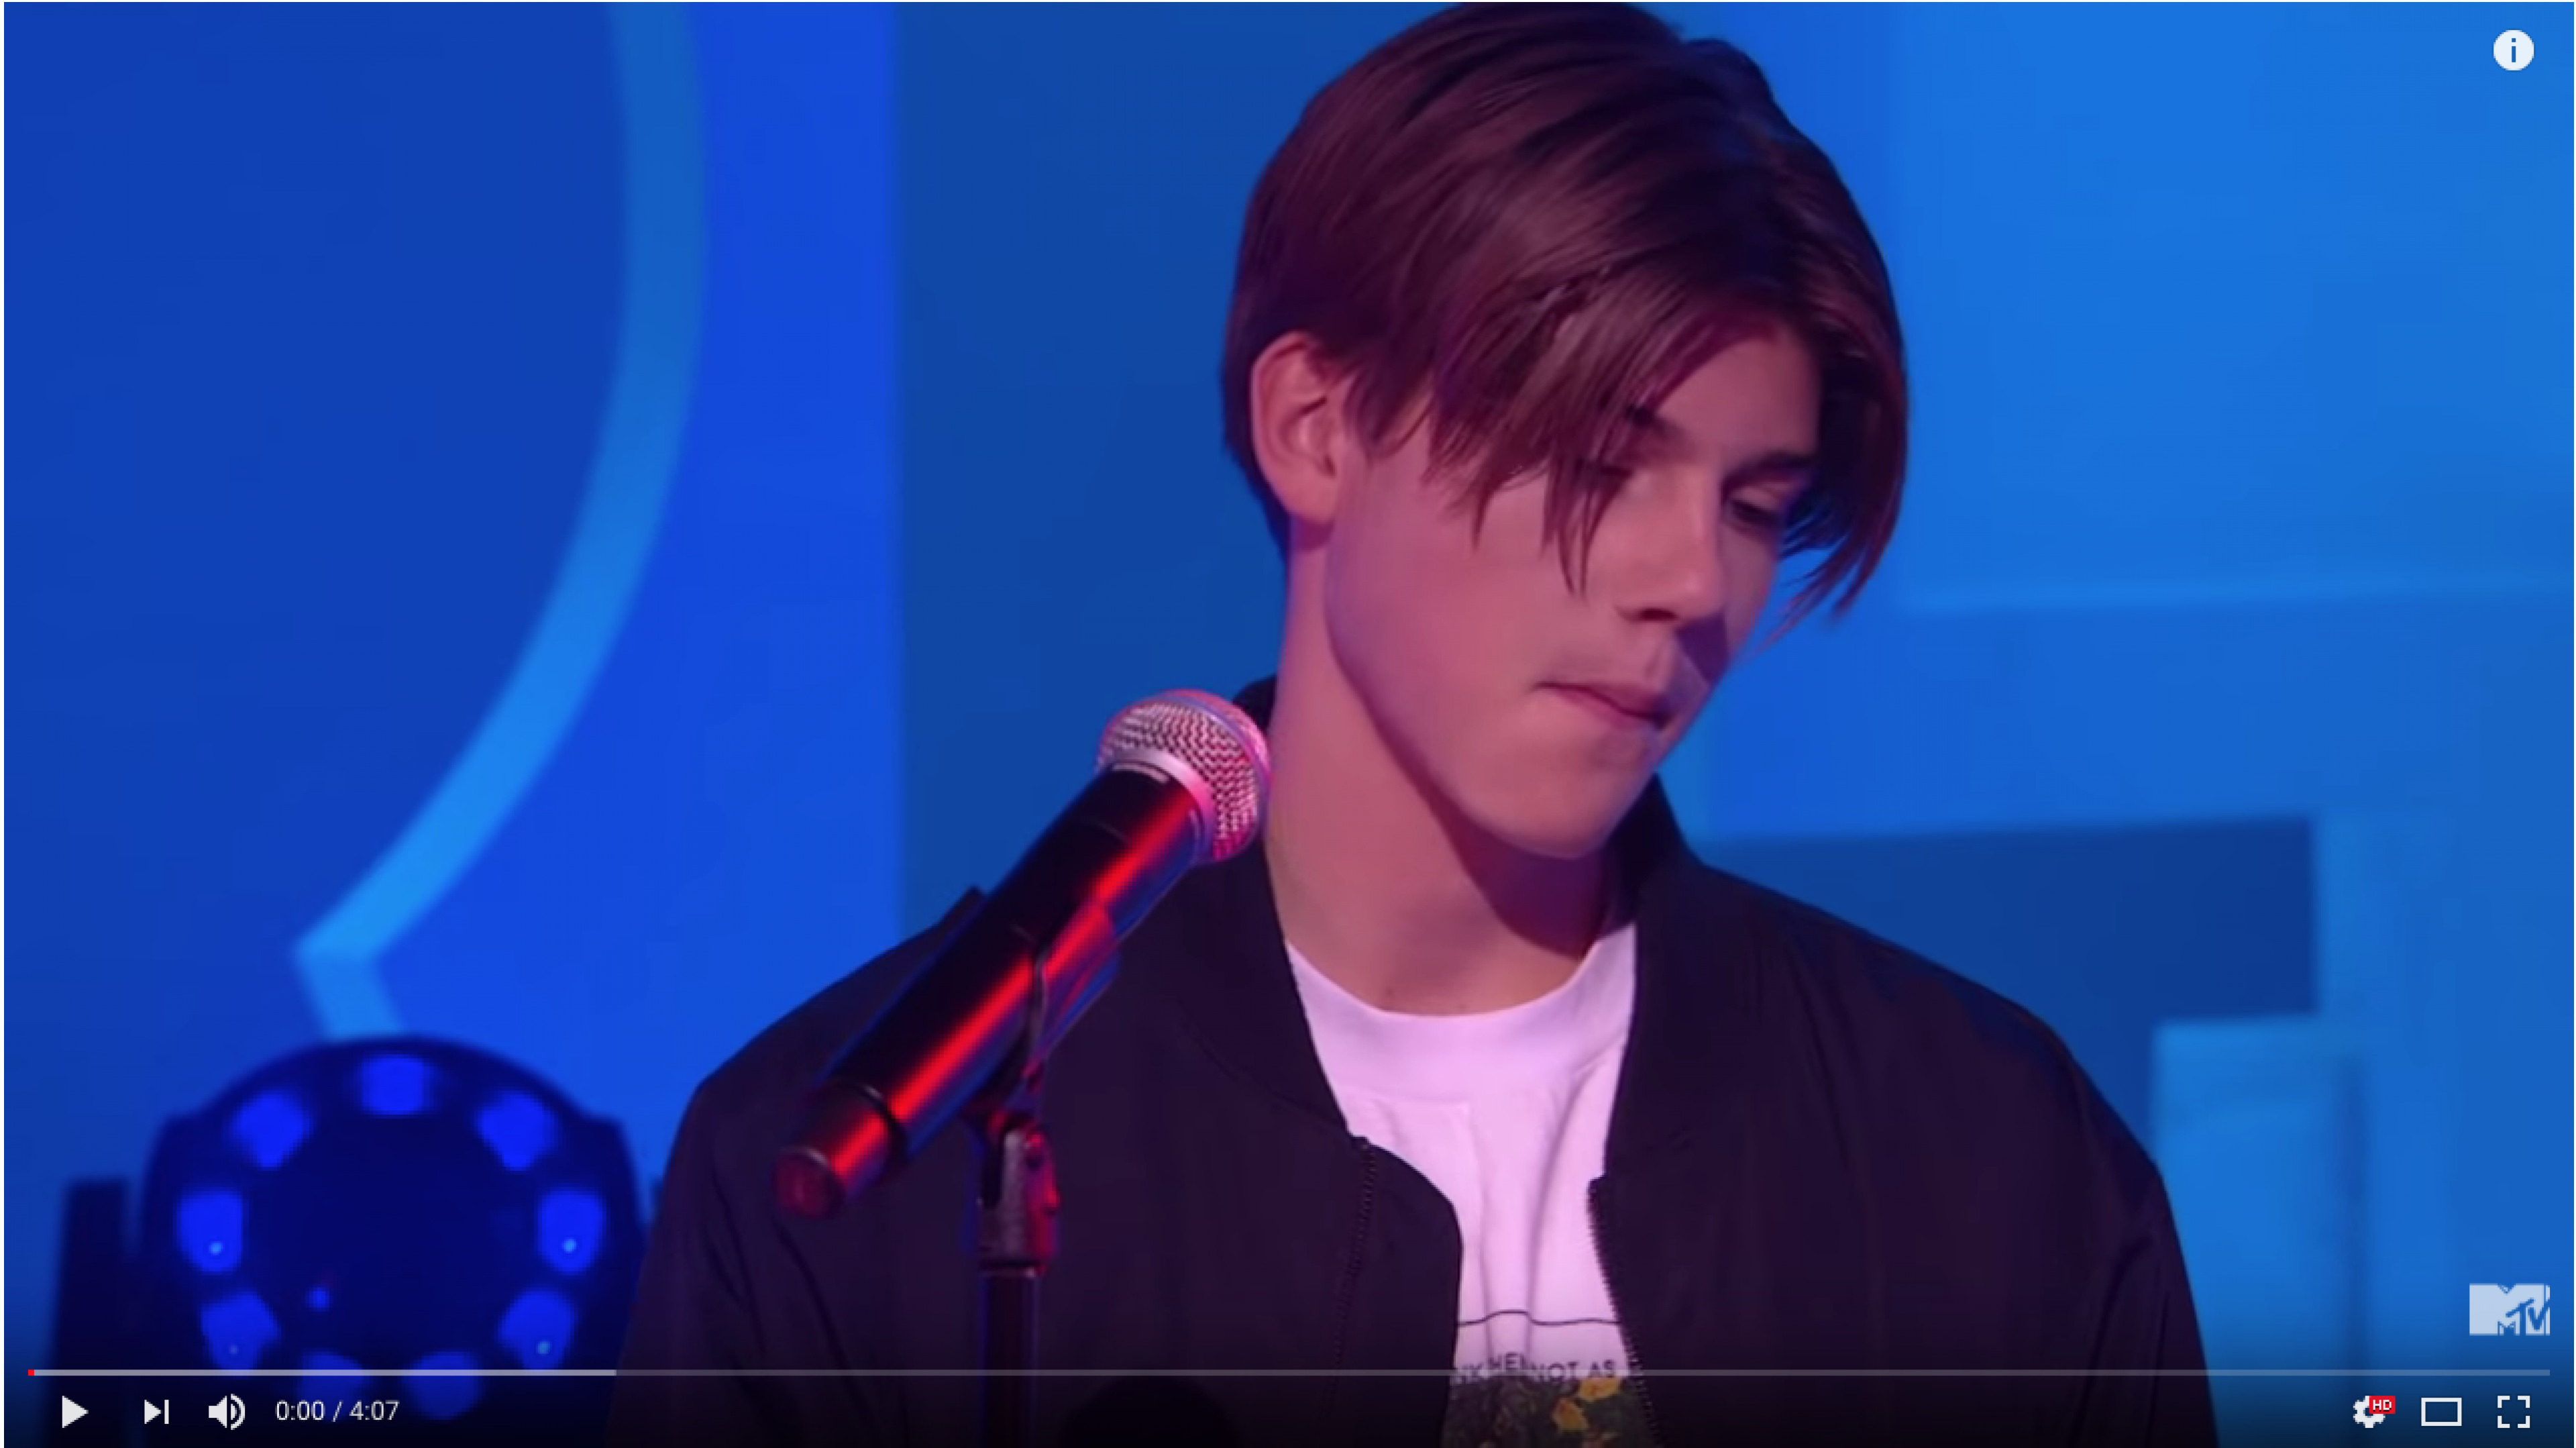 Ruel brings his latest single to the Times Square studio for MTV TRL